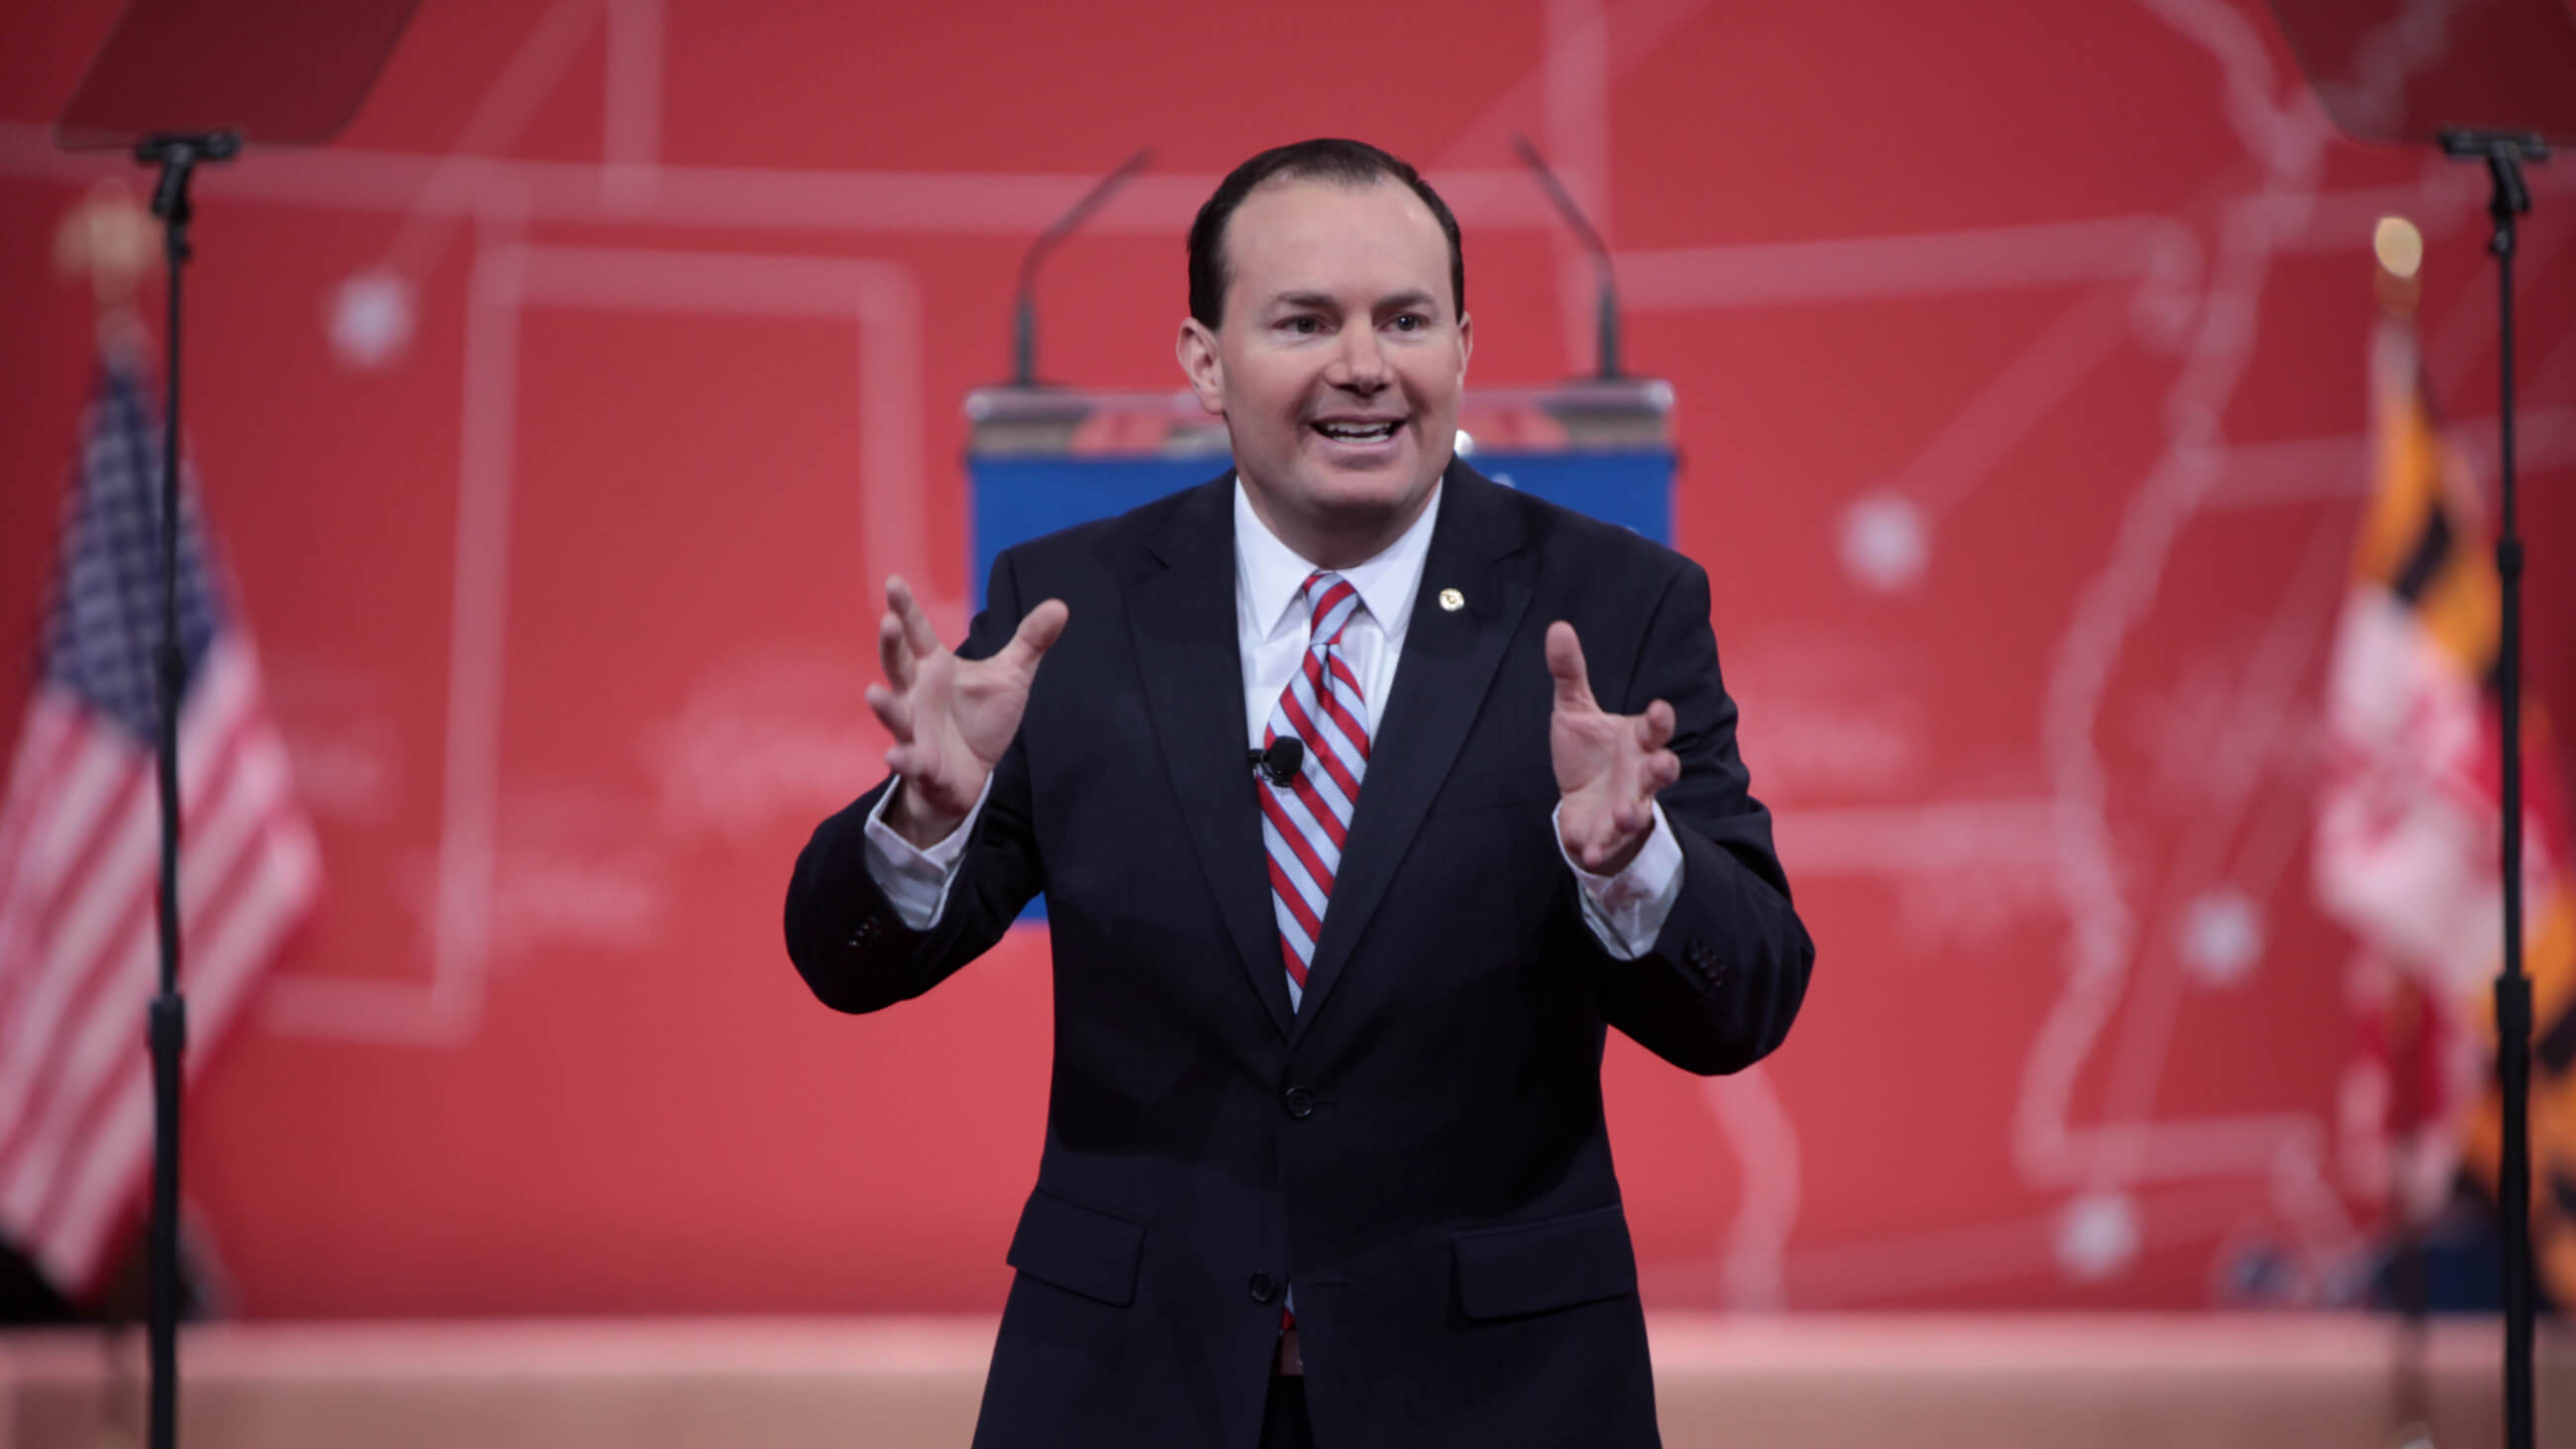 Mike Lee hält 2015 eine Rede bei der Conservative Political Action Conference (CPAC) in Maryland.